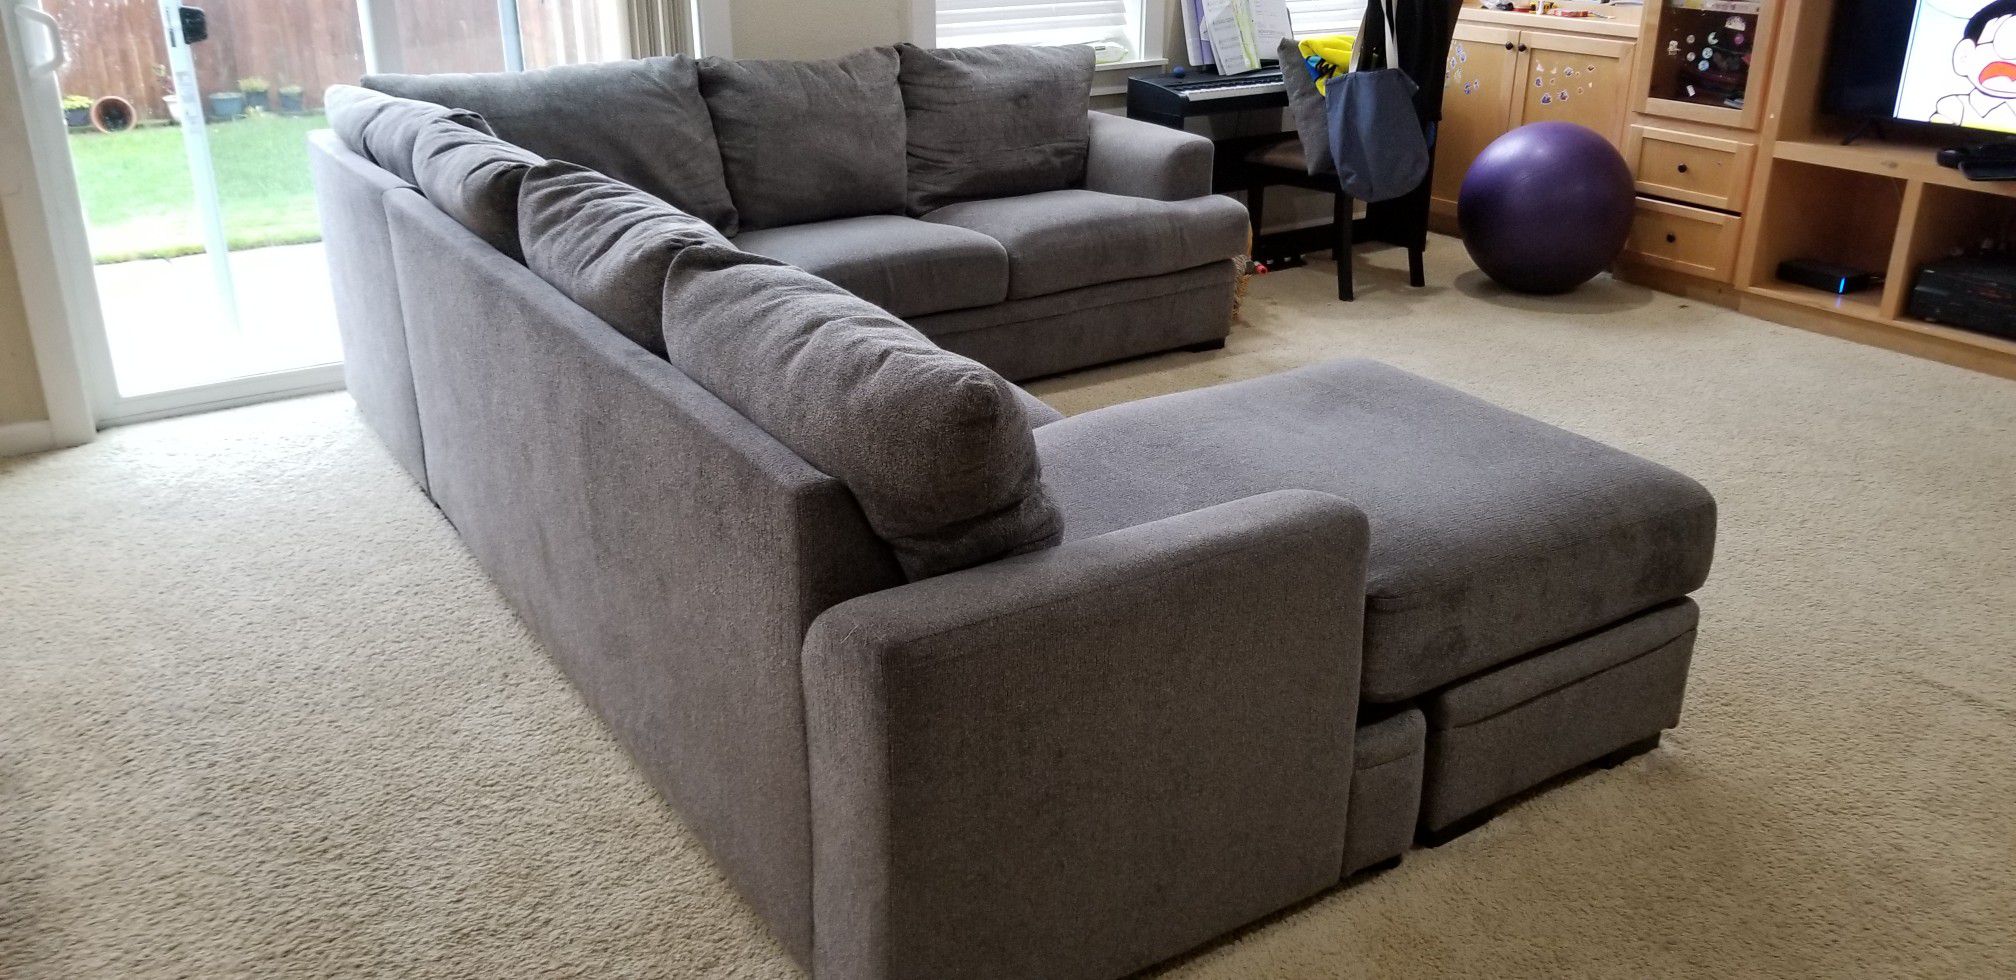 3-PC sectional - pending